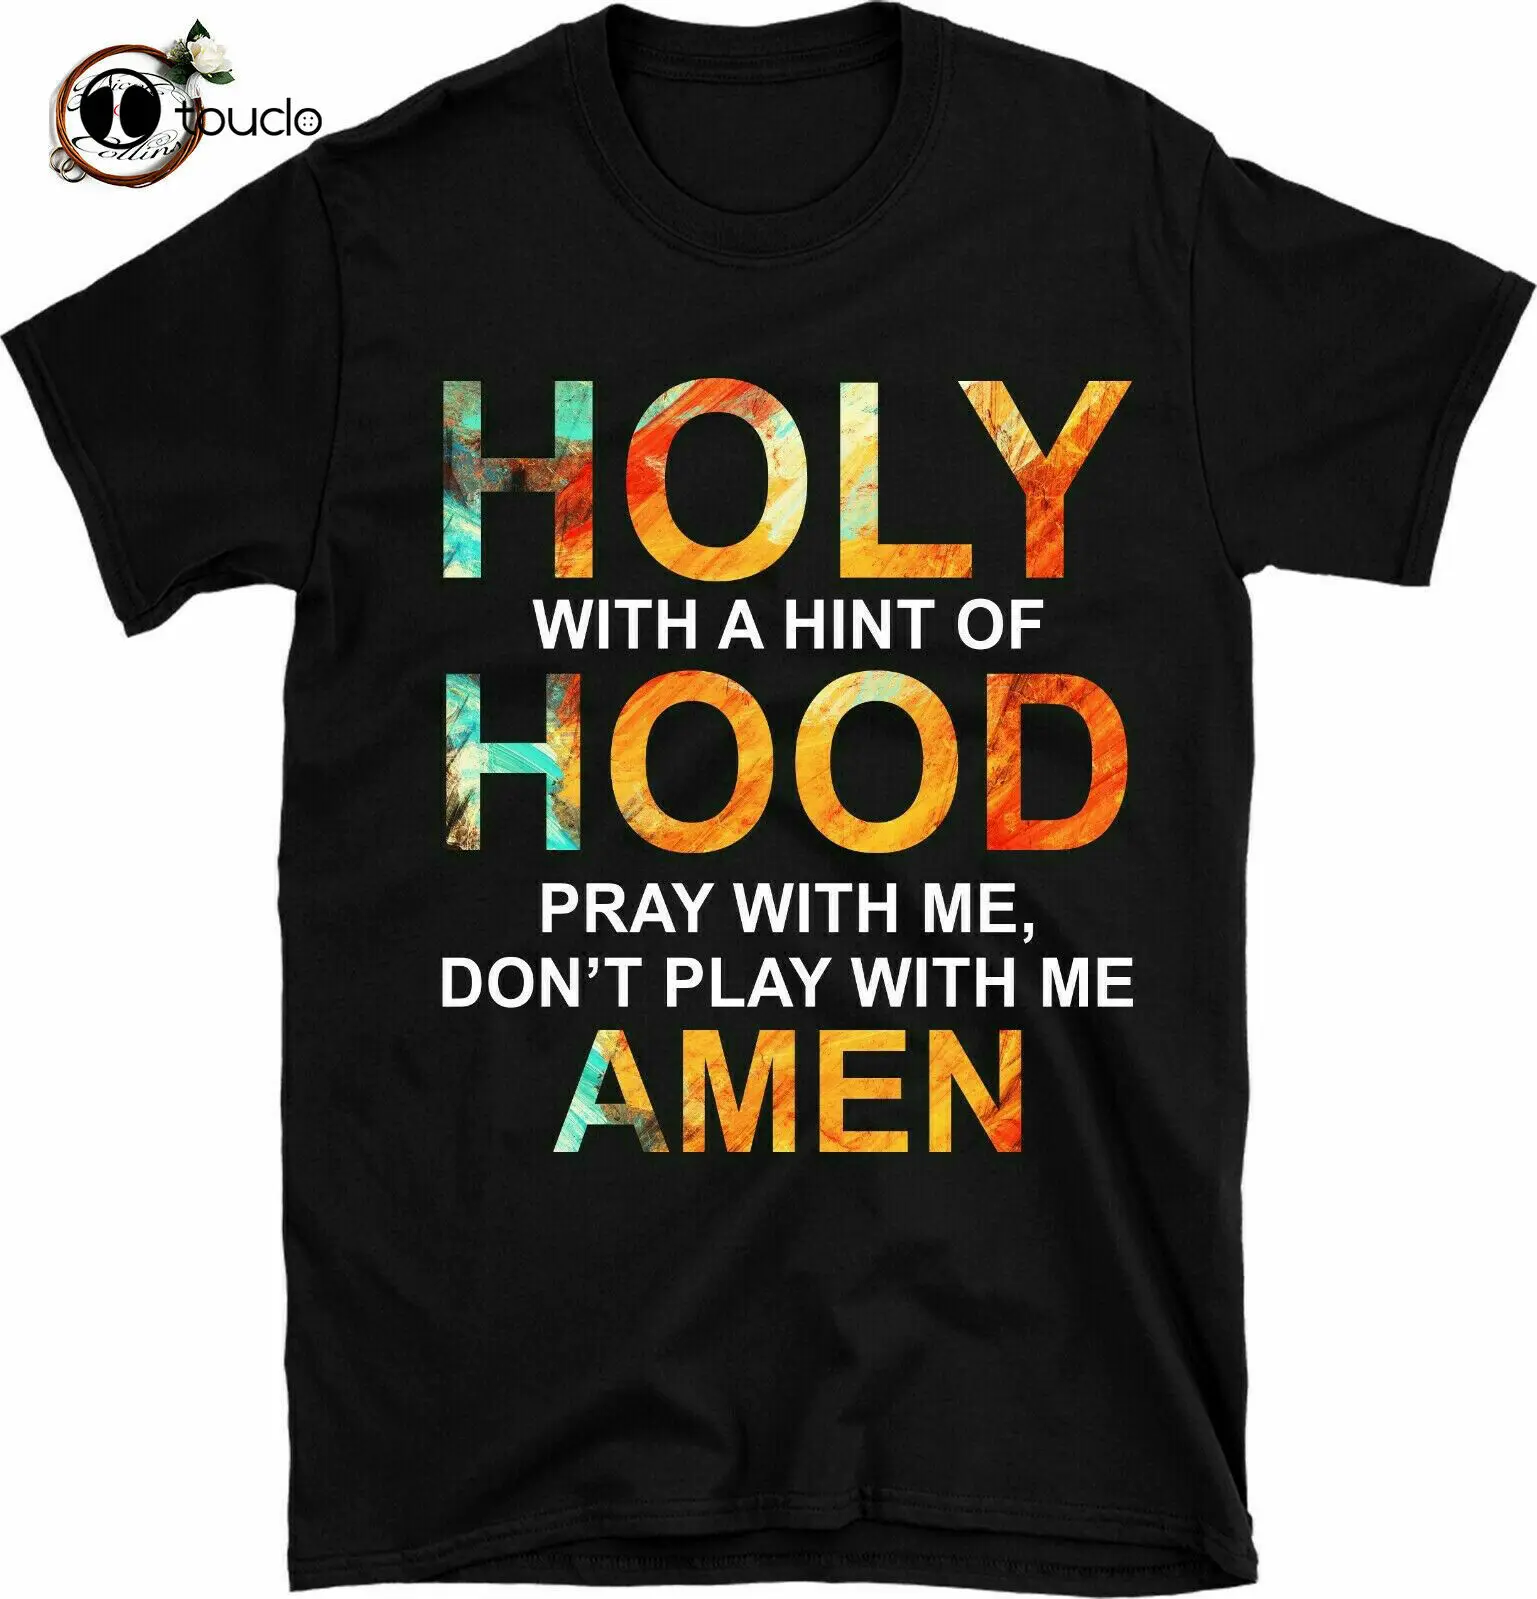 Holy With A Hint Of Hood Pray With Me Don'T Play With Me T-Shirt Unisex Fun Gift Tee Shirt Custom aldult Teen unisex unisex